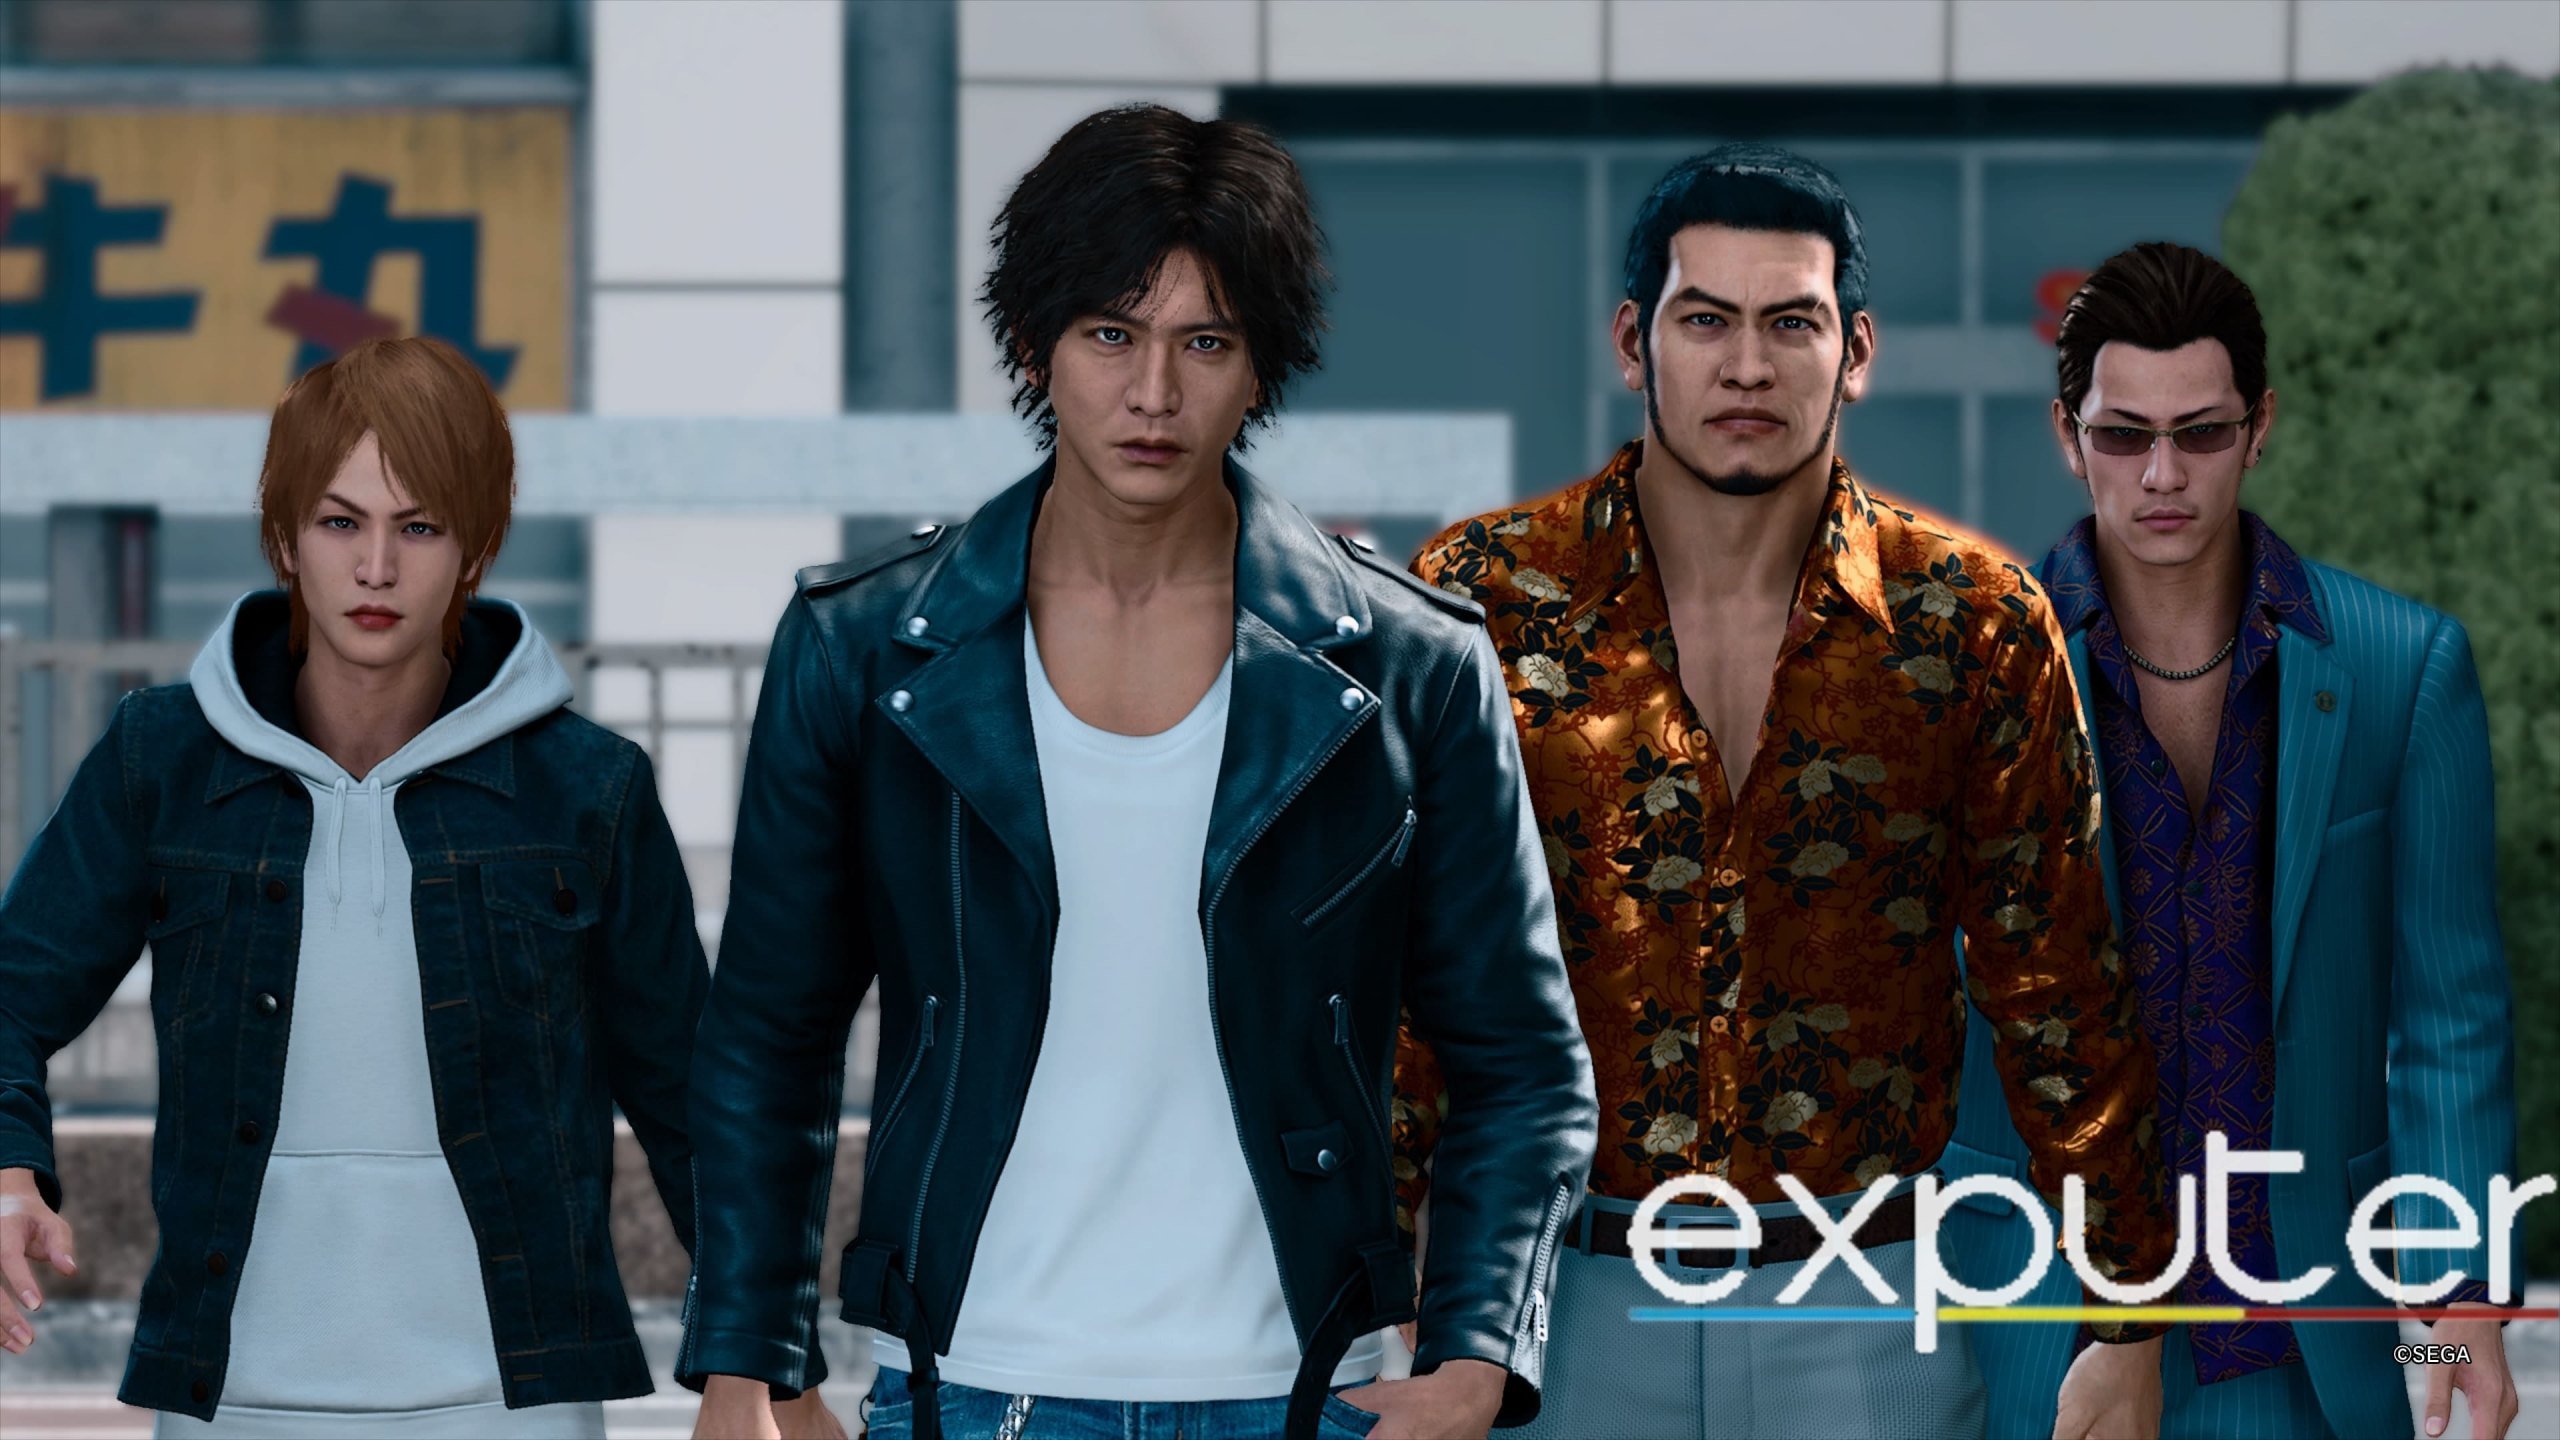 side characters in judgment